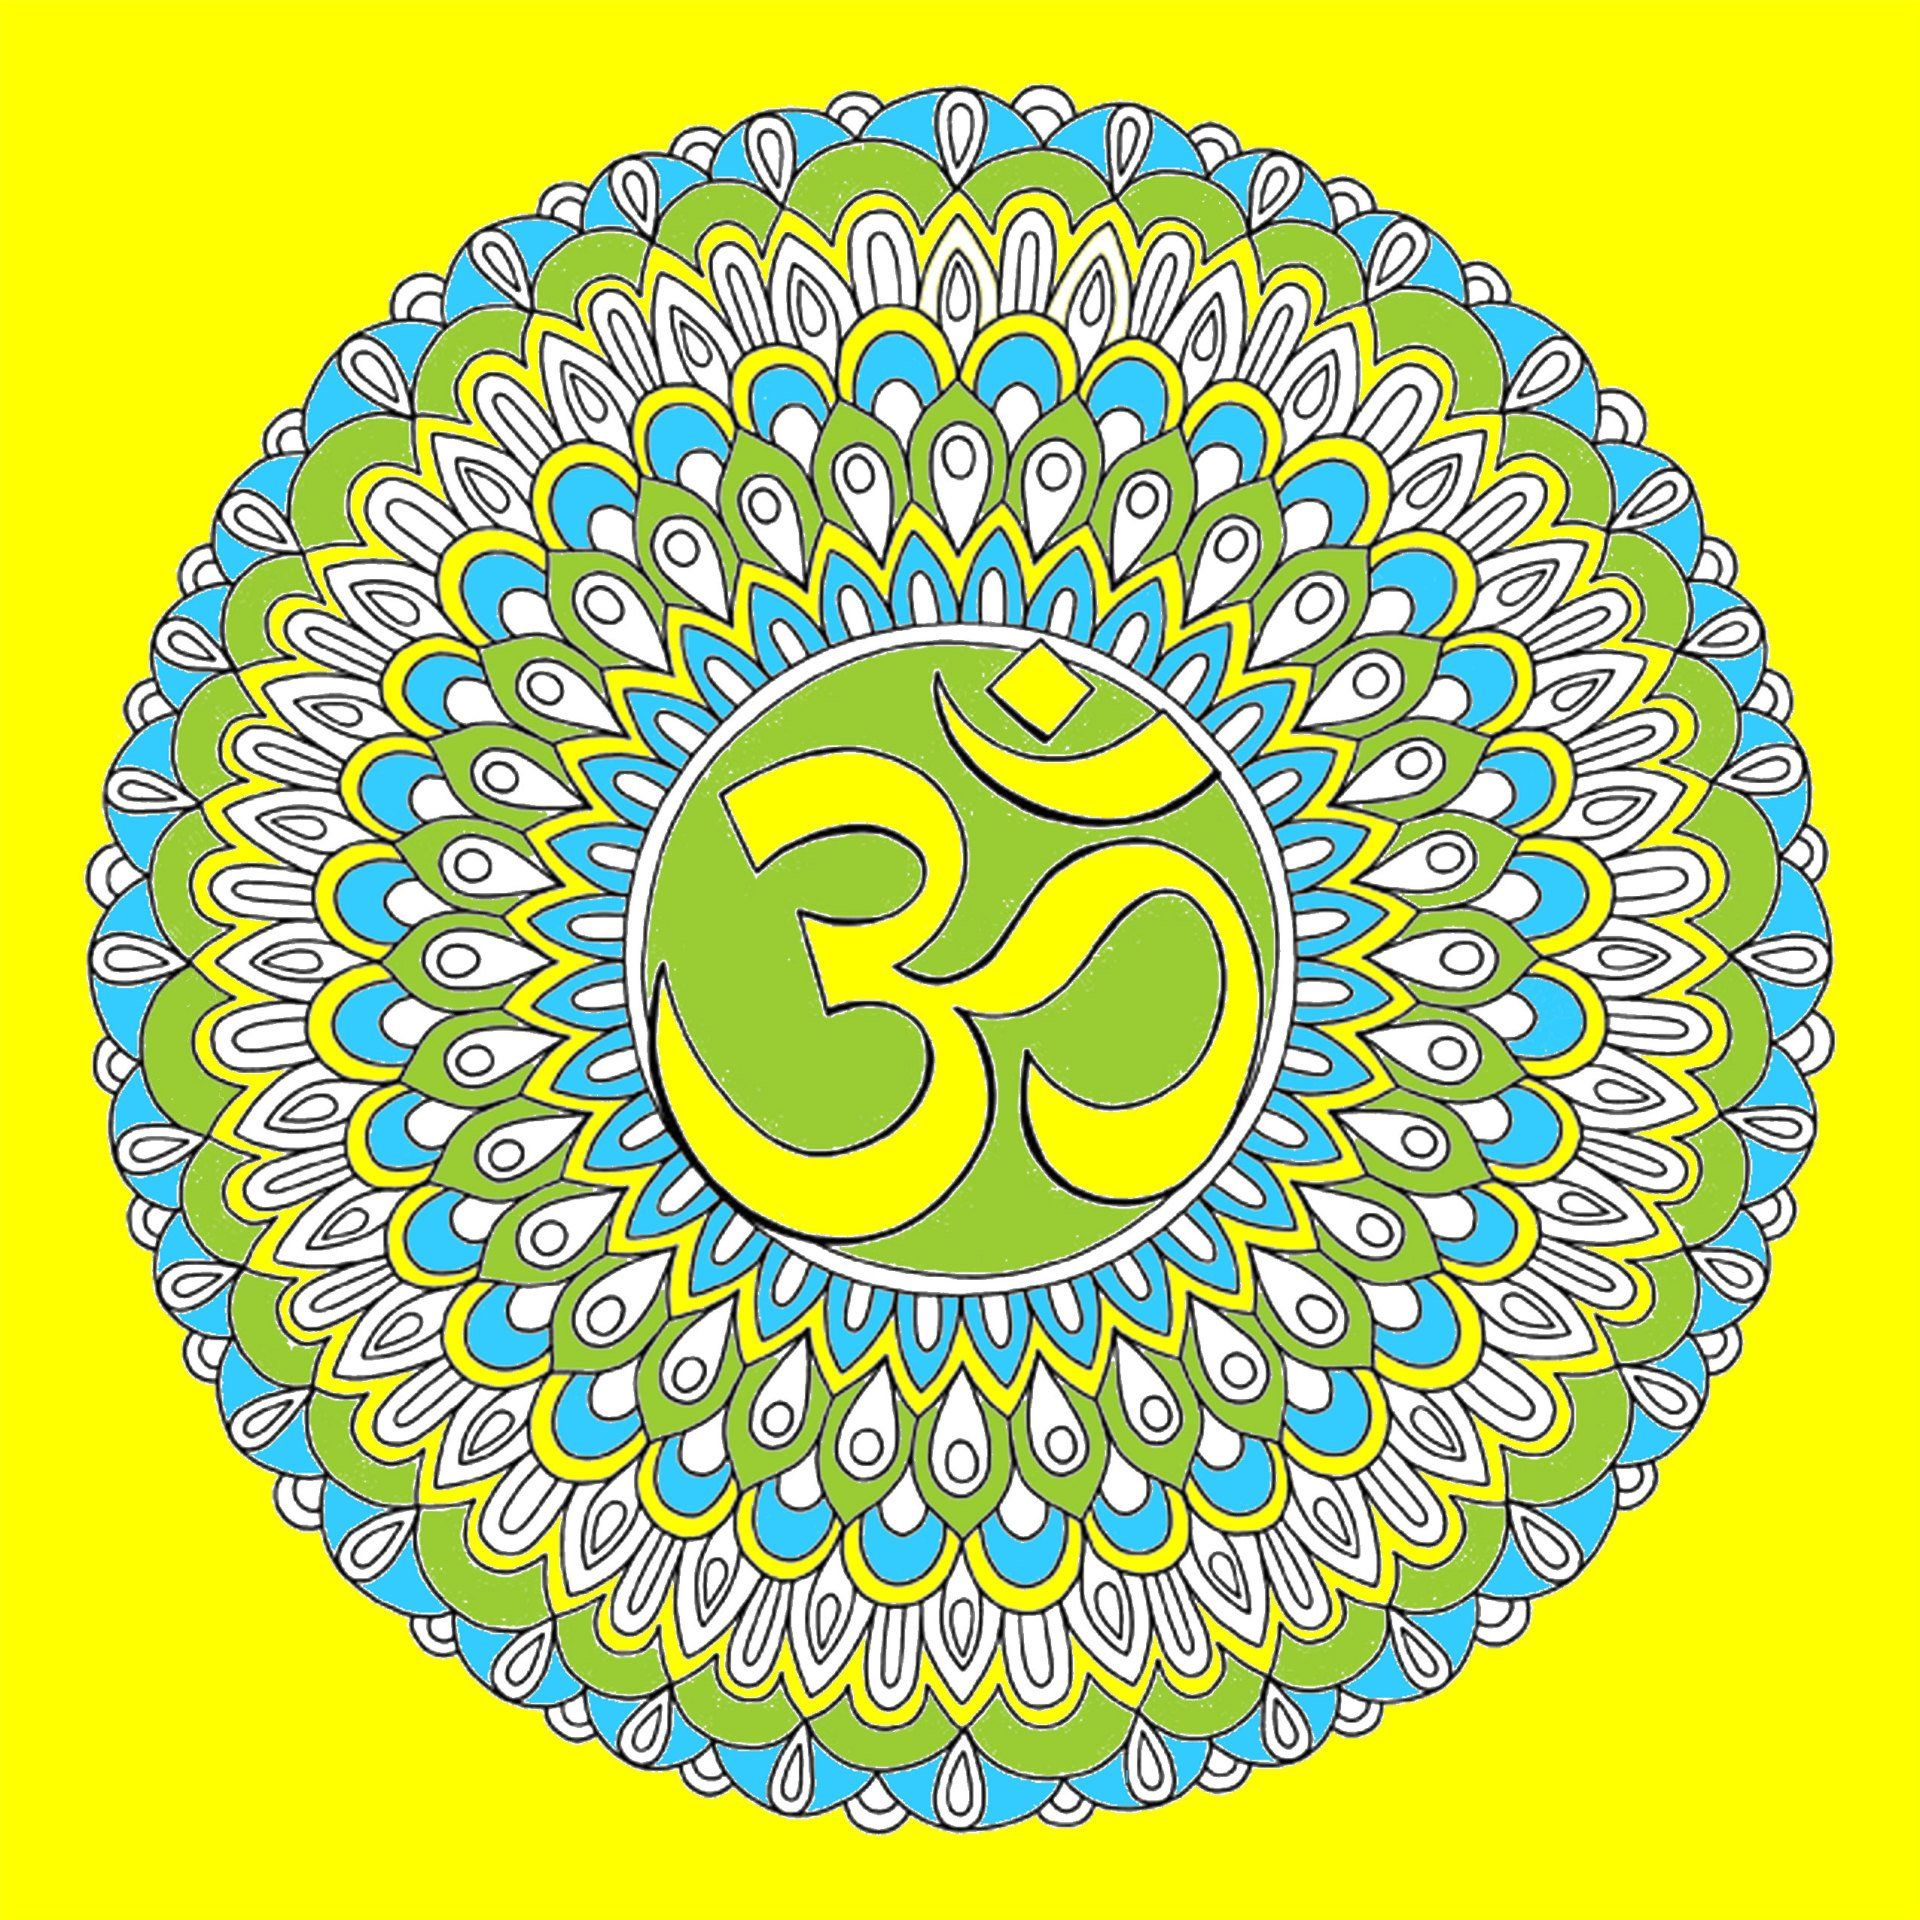 Chanting OM is a fun & easy way to reduce stress & anxiety and treat depression